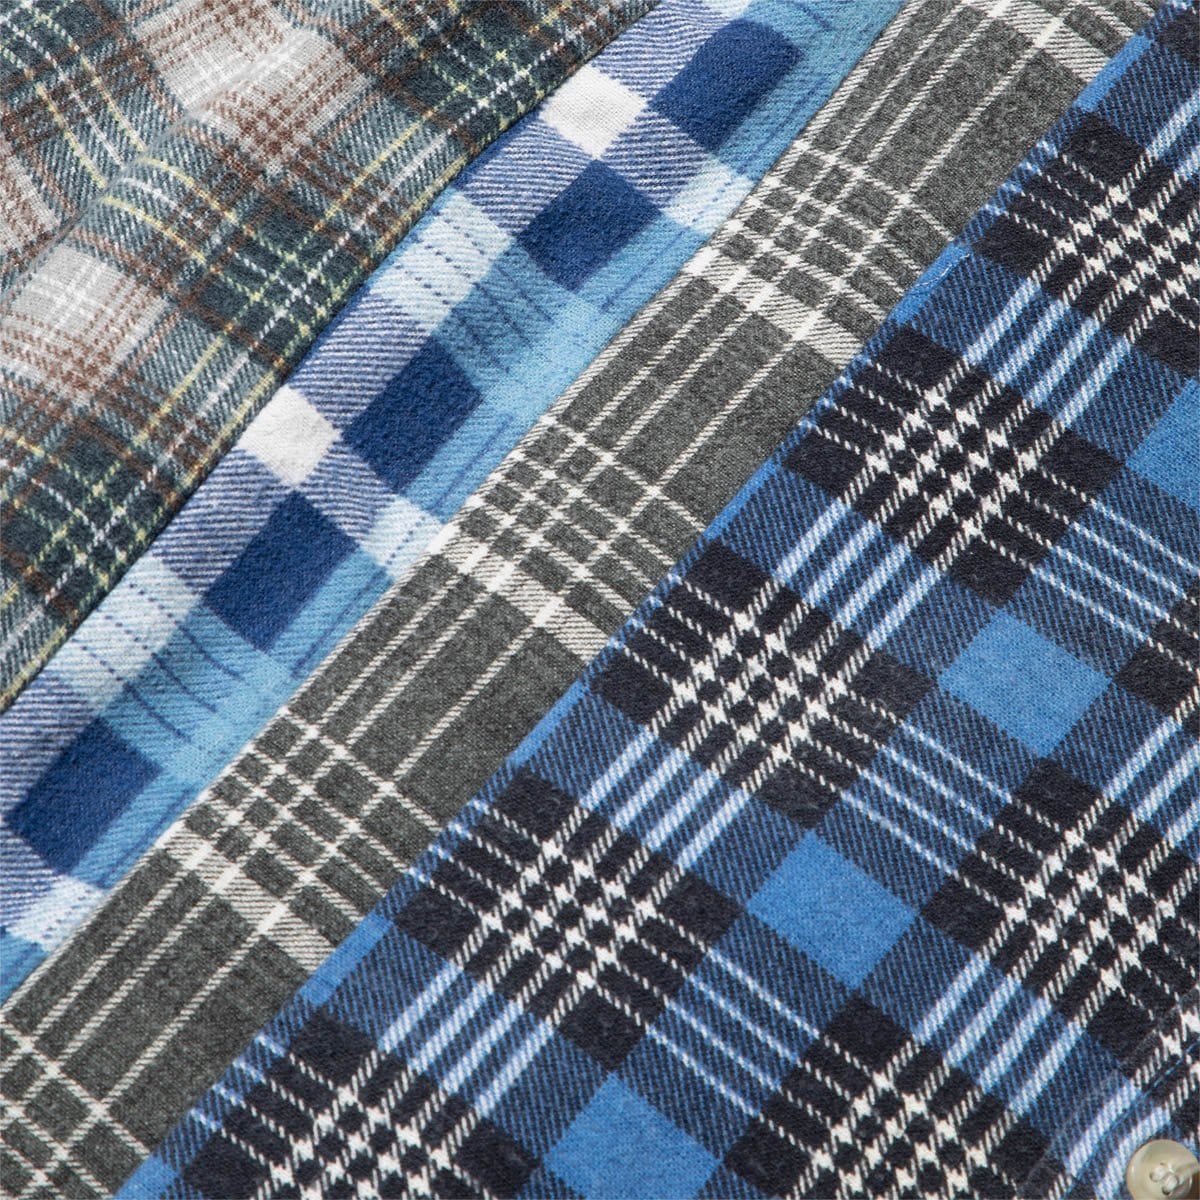 Needles Shirts ASSORTED / M 7 CUTS FLANNEL SHIRT SS21 8